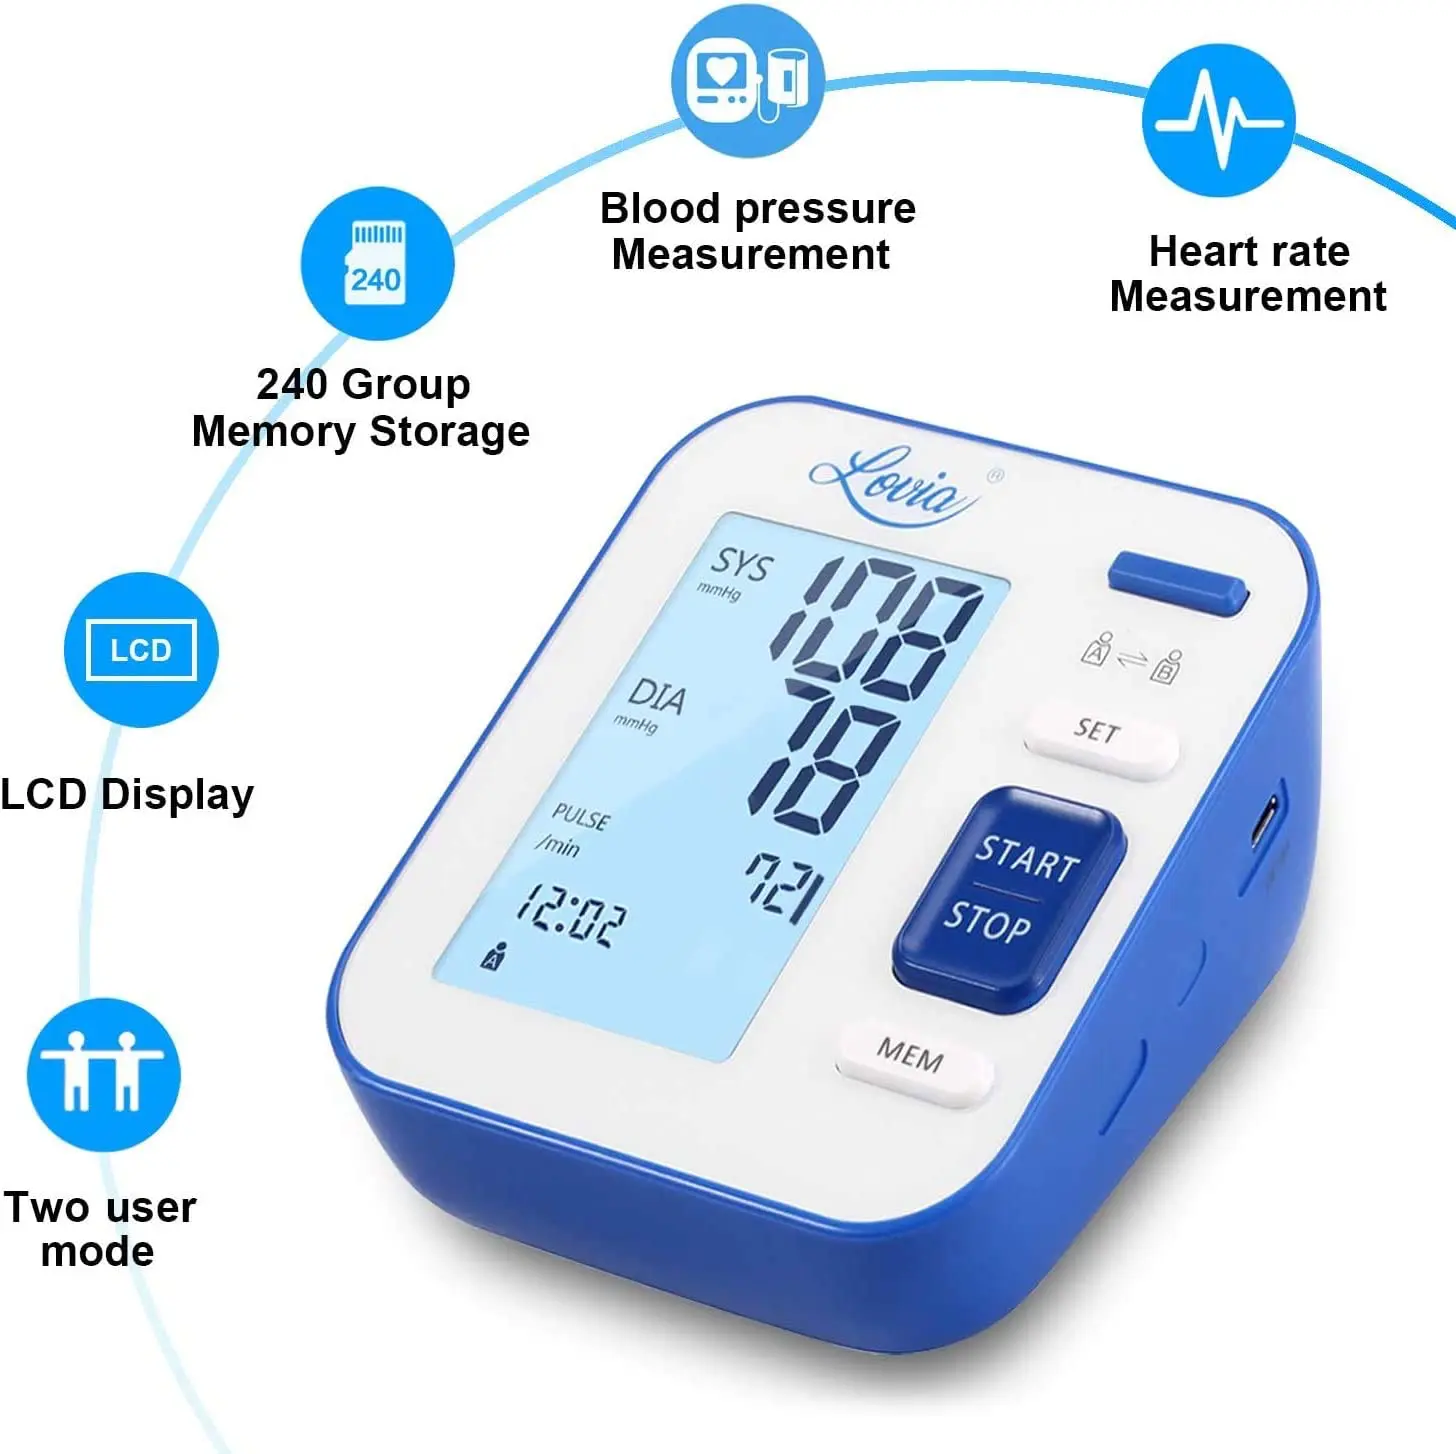 CIEKAA Blood Pressure Monitor - Accurate Automatic Digital BP Machine for Home Use & Pulse Rate Monitoring Meter with Cuff 22-42 cm, 2×120 Sets Memory, Backlit Display, Includes Batteries, Carrying Case